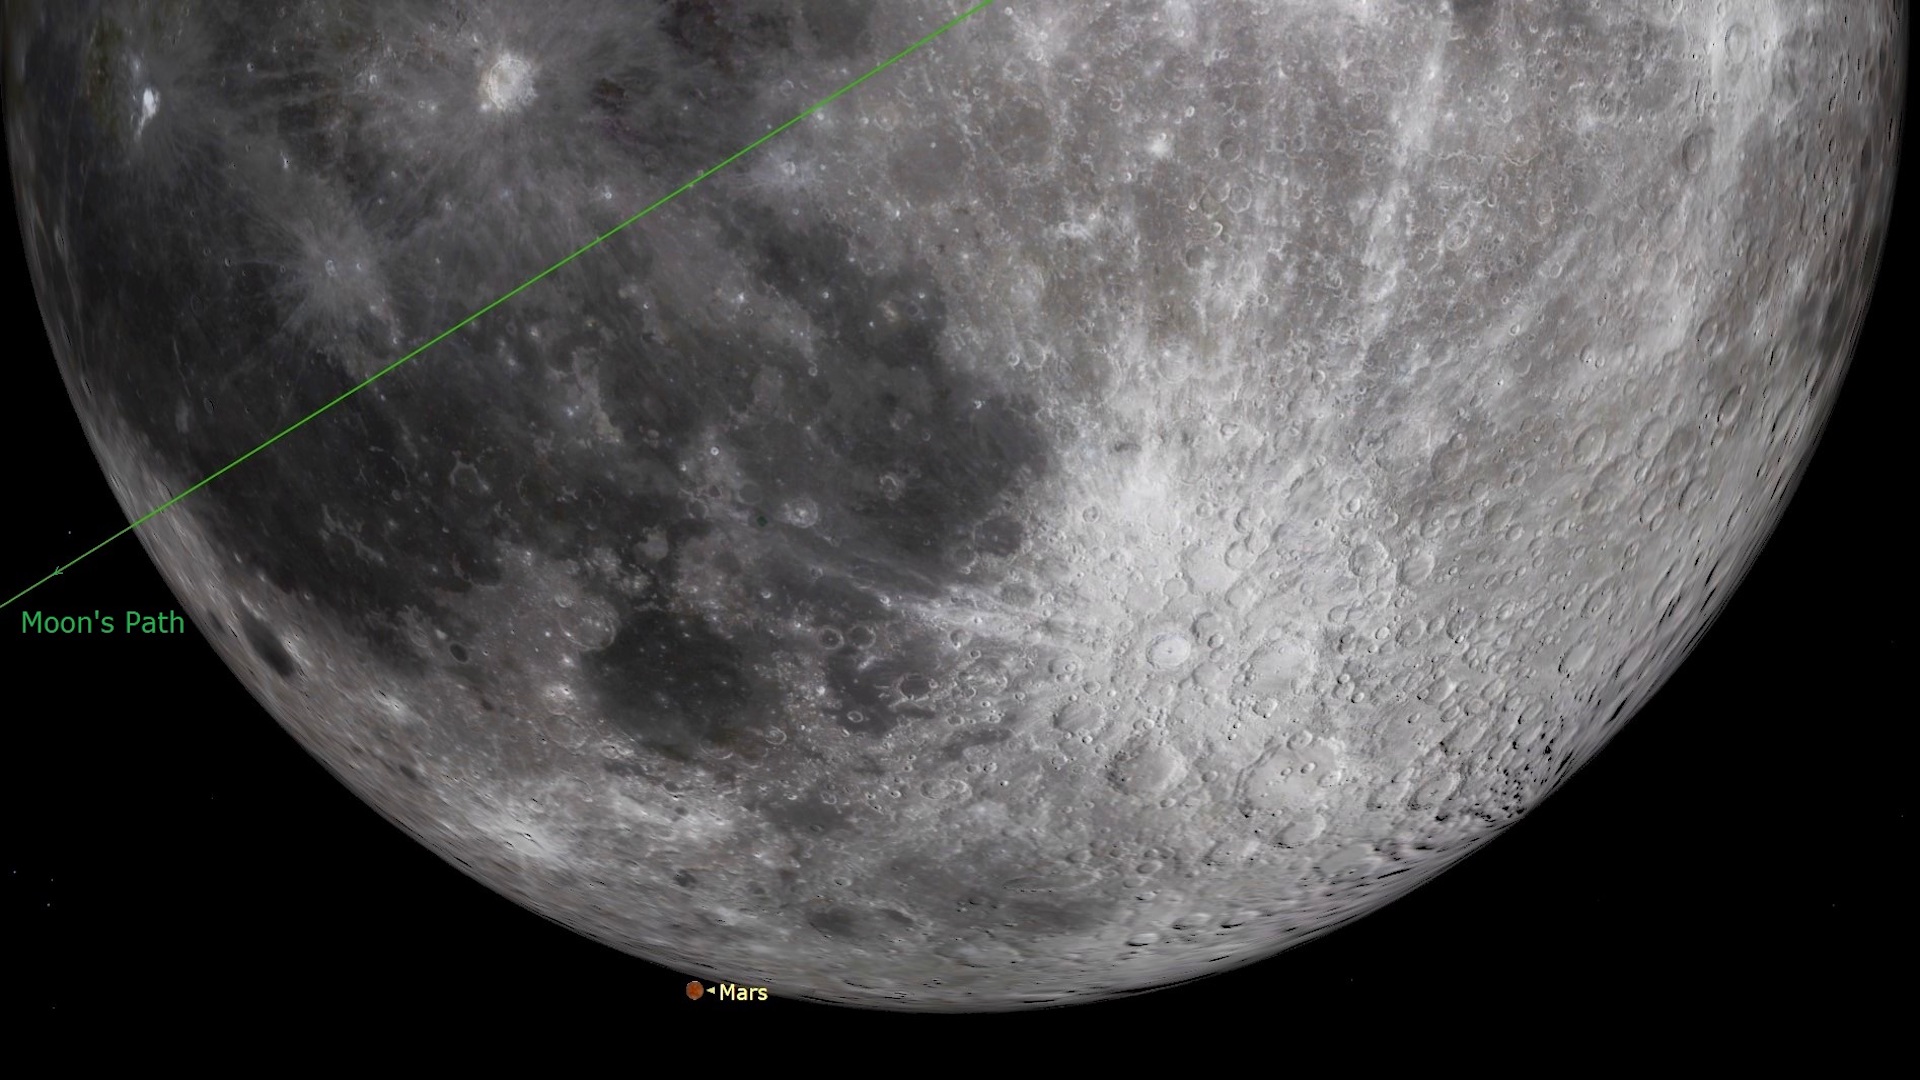 An illustration of the full cold moon that will appear on December 7, with Mars visible behind it.